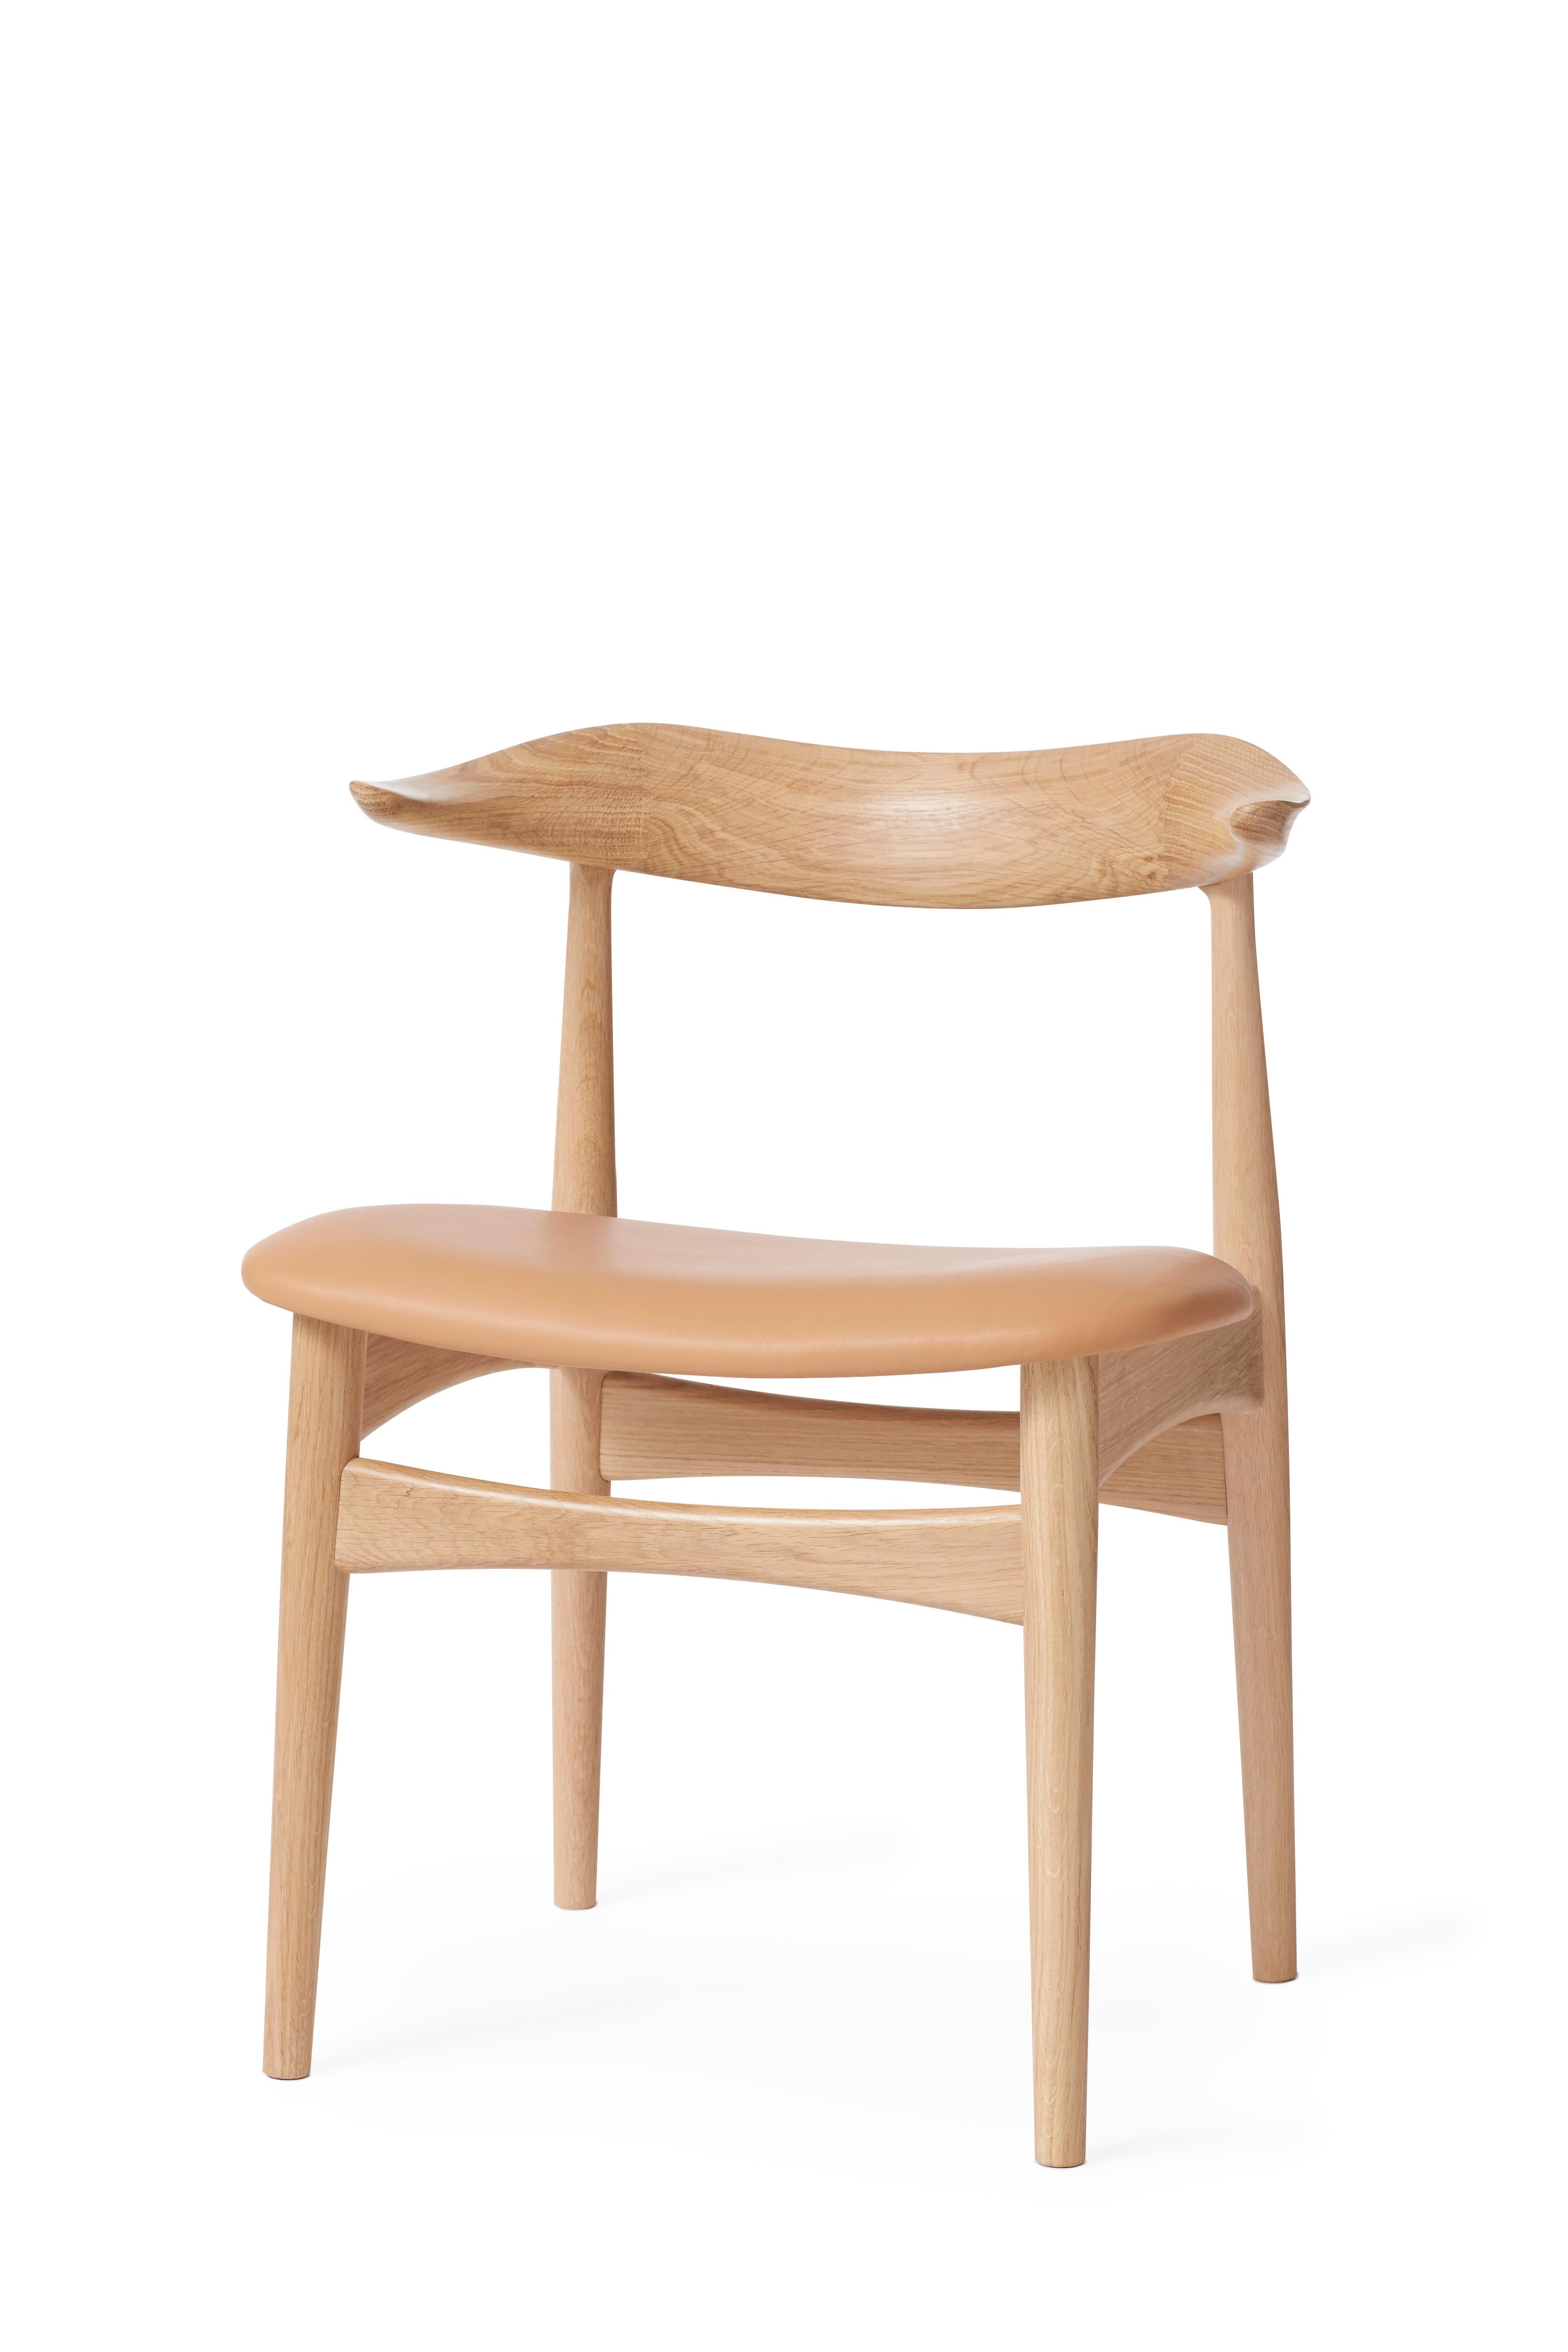 For Sale: Pink (Soavé) Cow Horn Oak Chair, by Knud Færch from Warm Nordic 2